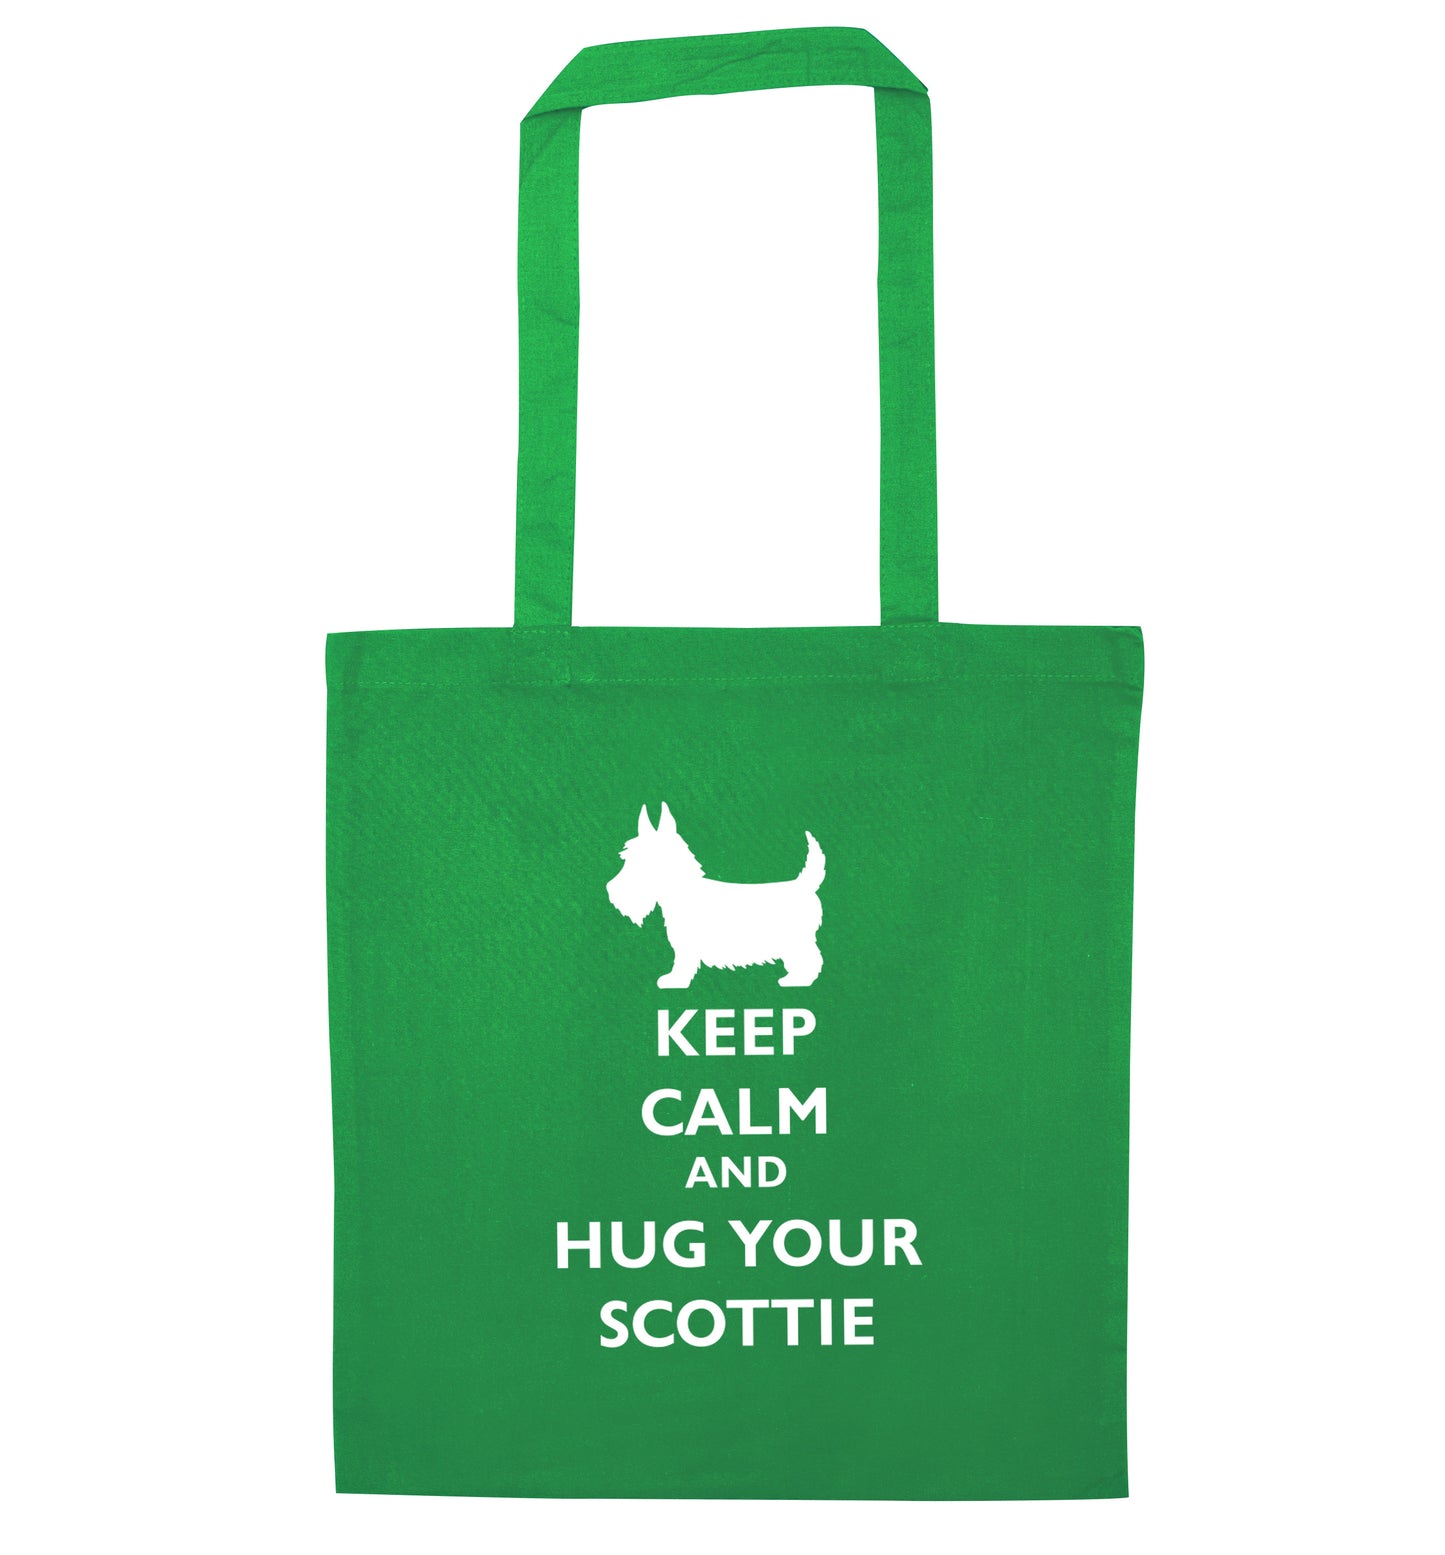 Keep calm and hug your scottie green tote bag